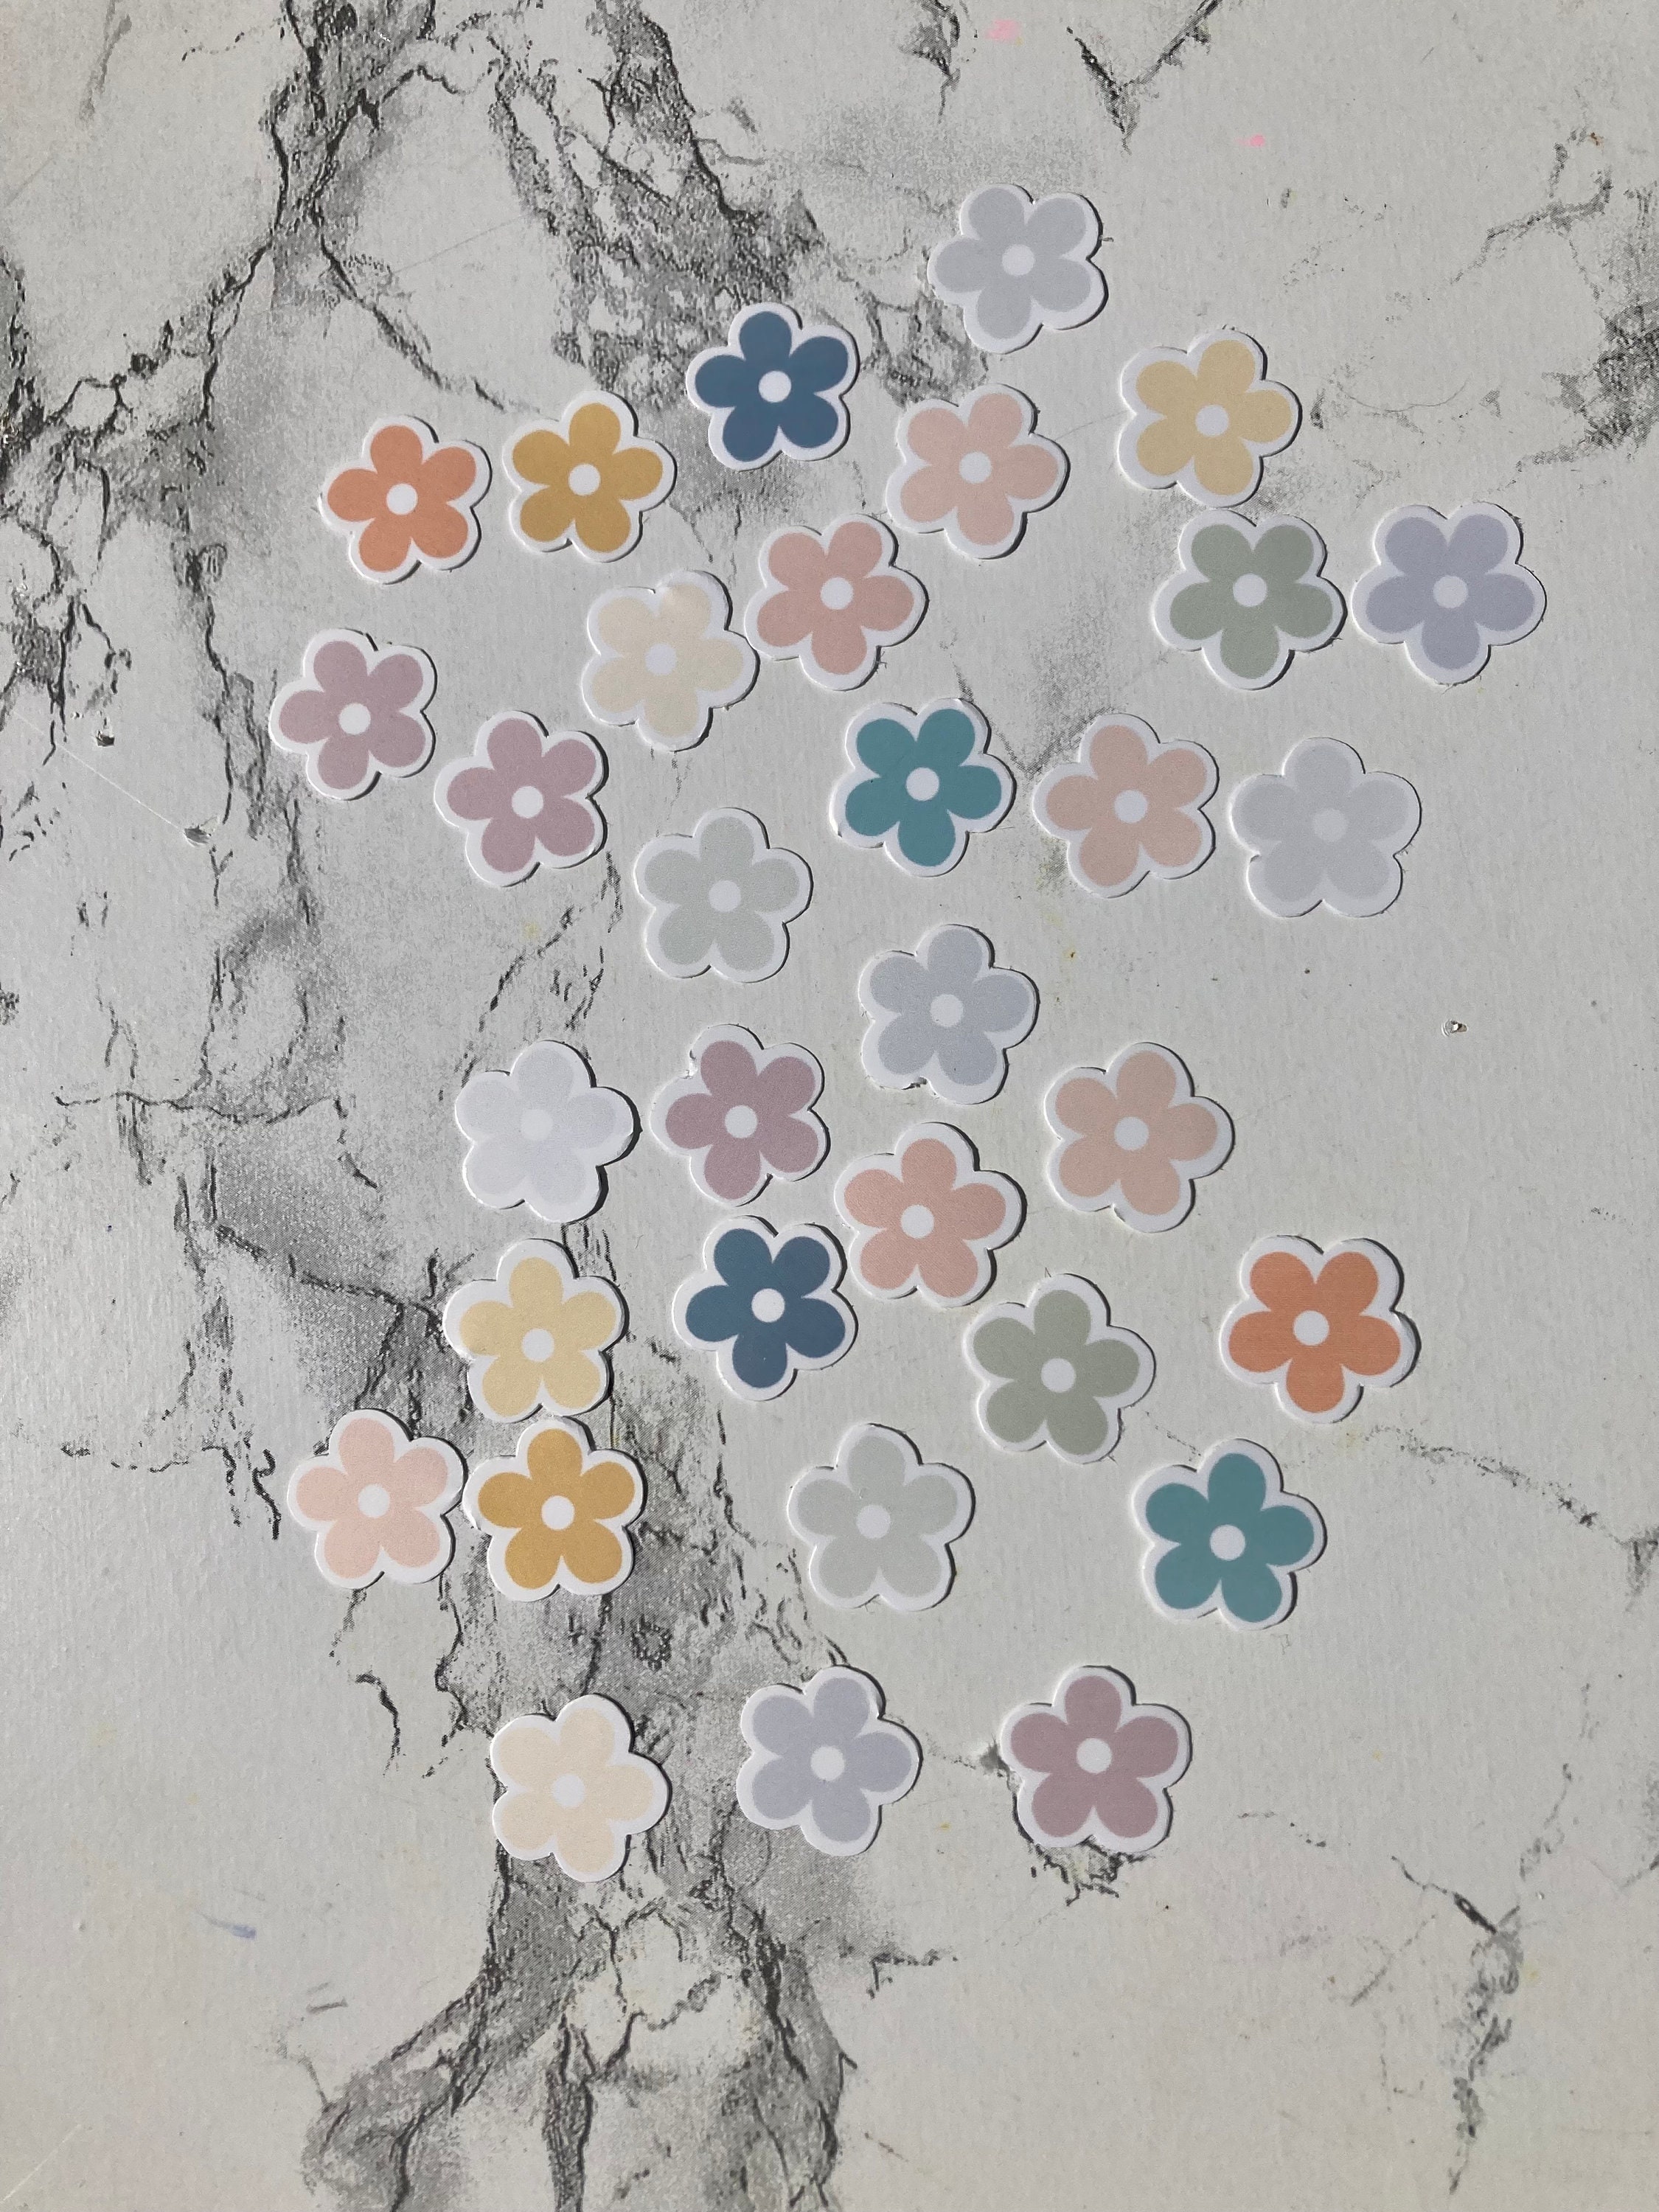 585 Pcs Mini Flower Stickers for Scrapbooking,Boho Tiny Stickers Small Cute  Stickers Self-Adhesive Pastel Stickers Vinyl Flower Decals for Water